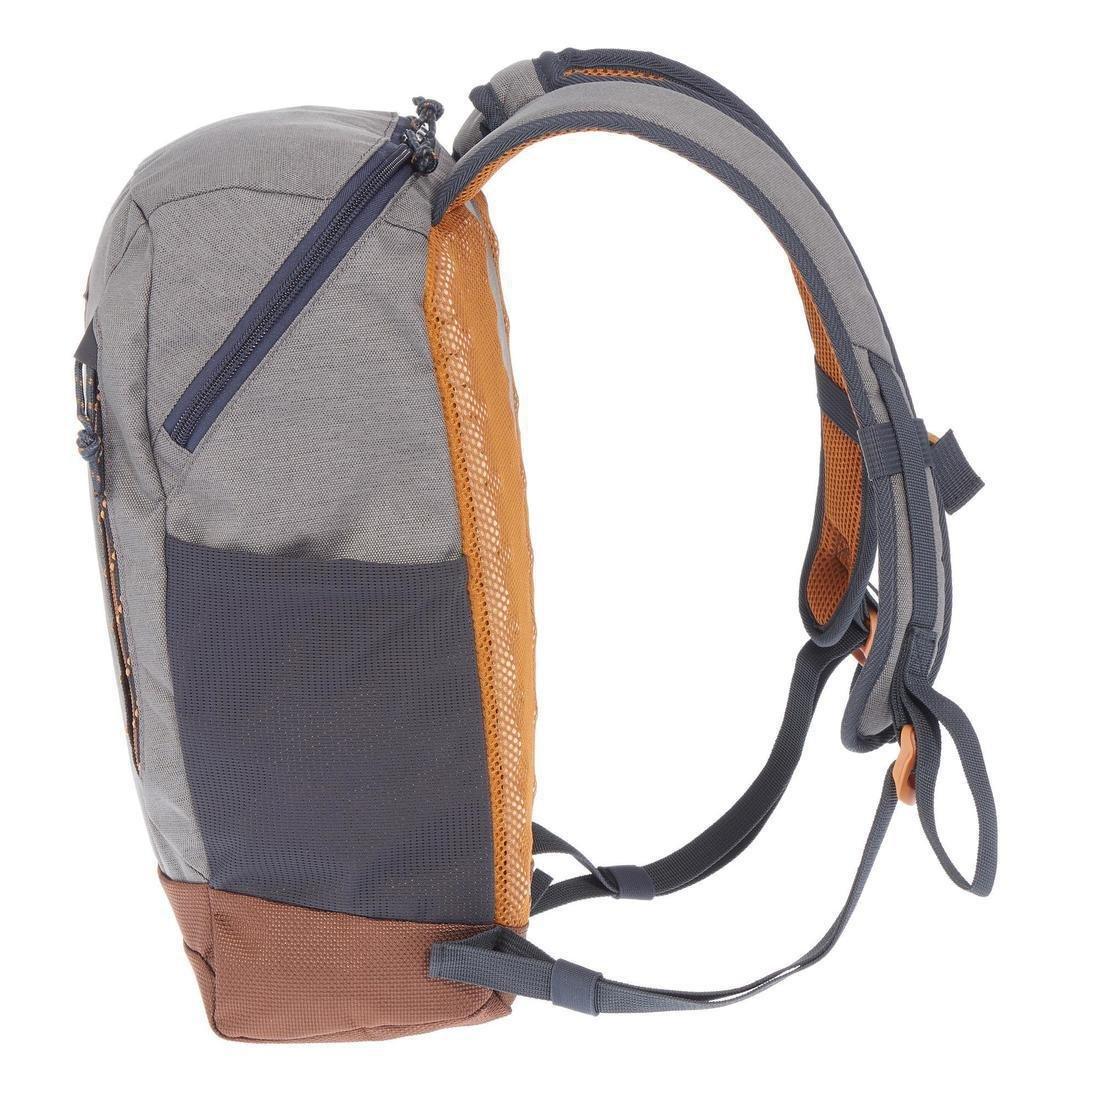 QUECHUA - Country Walking Backpack, Grey